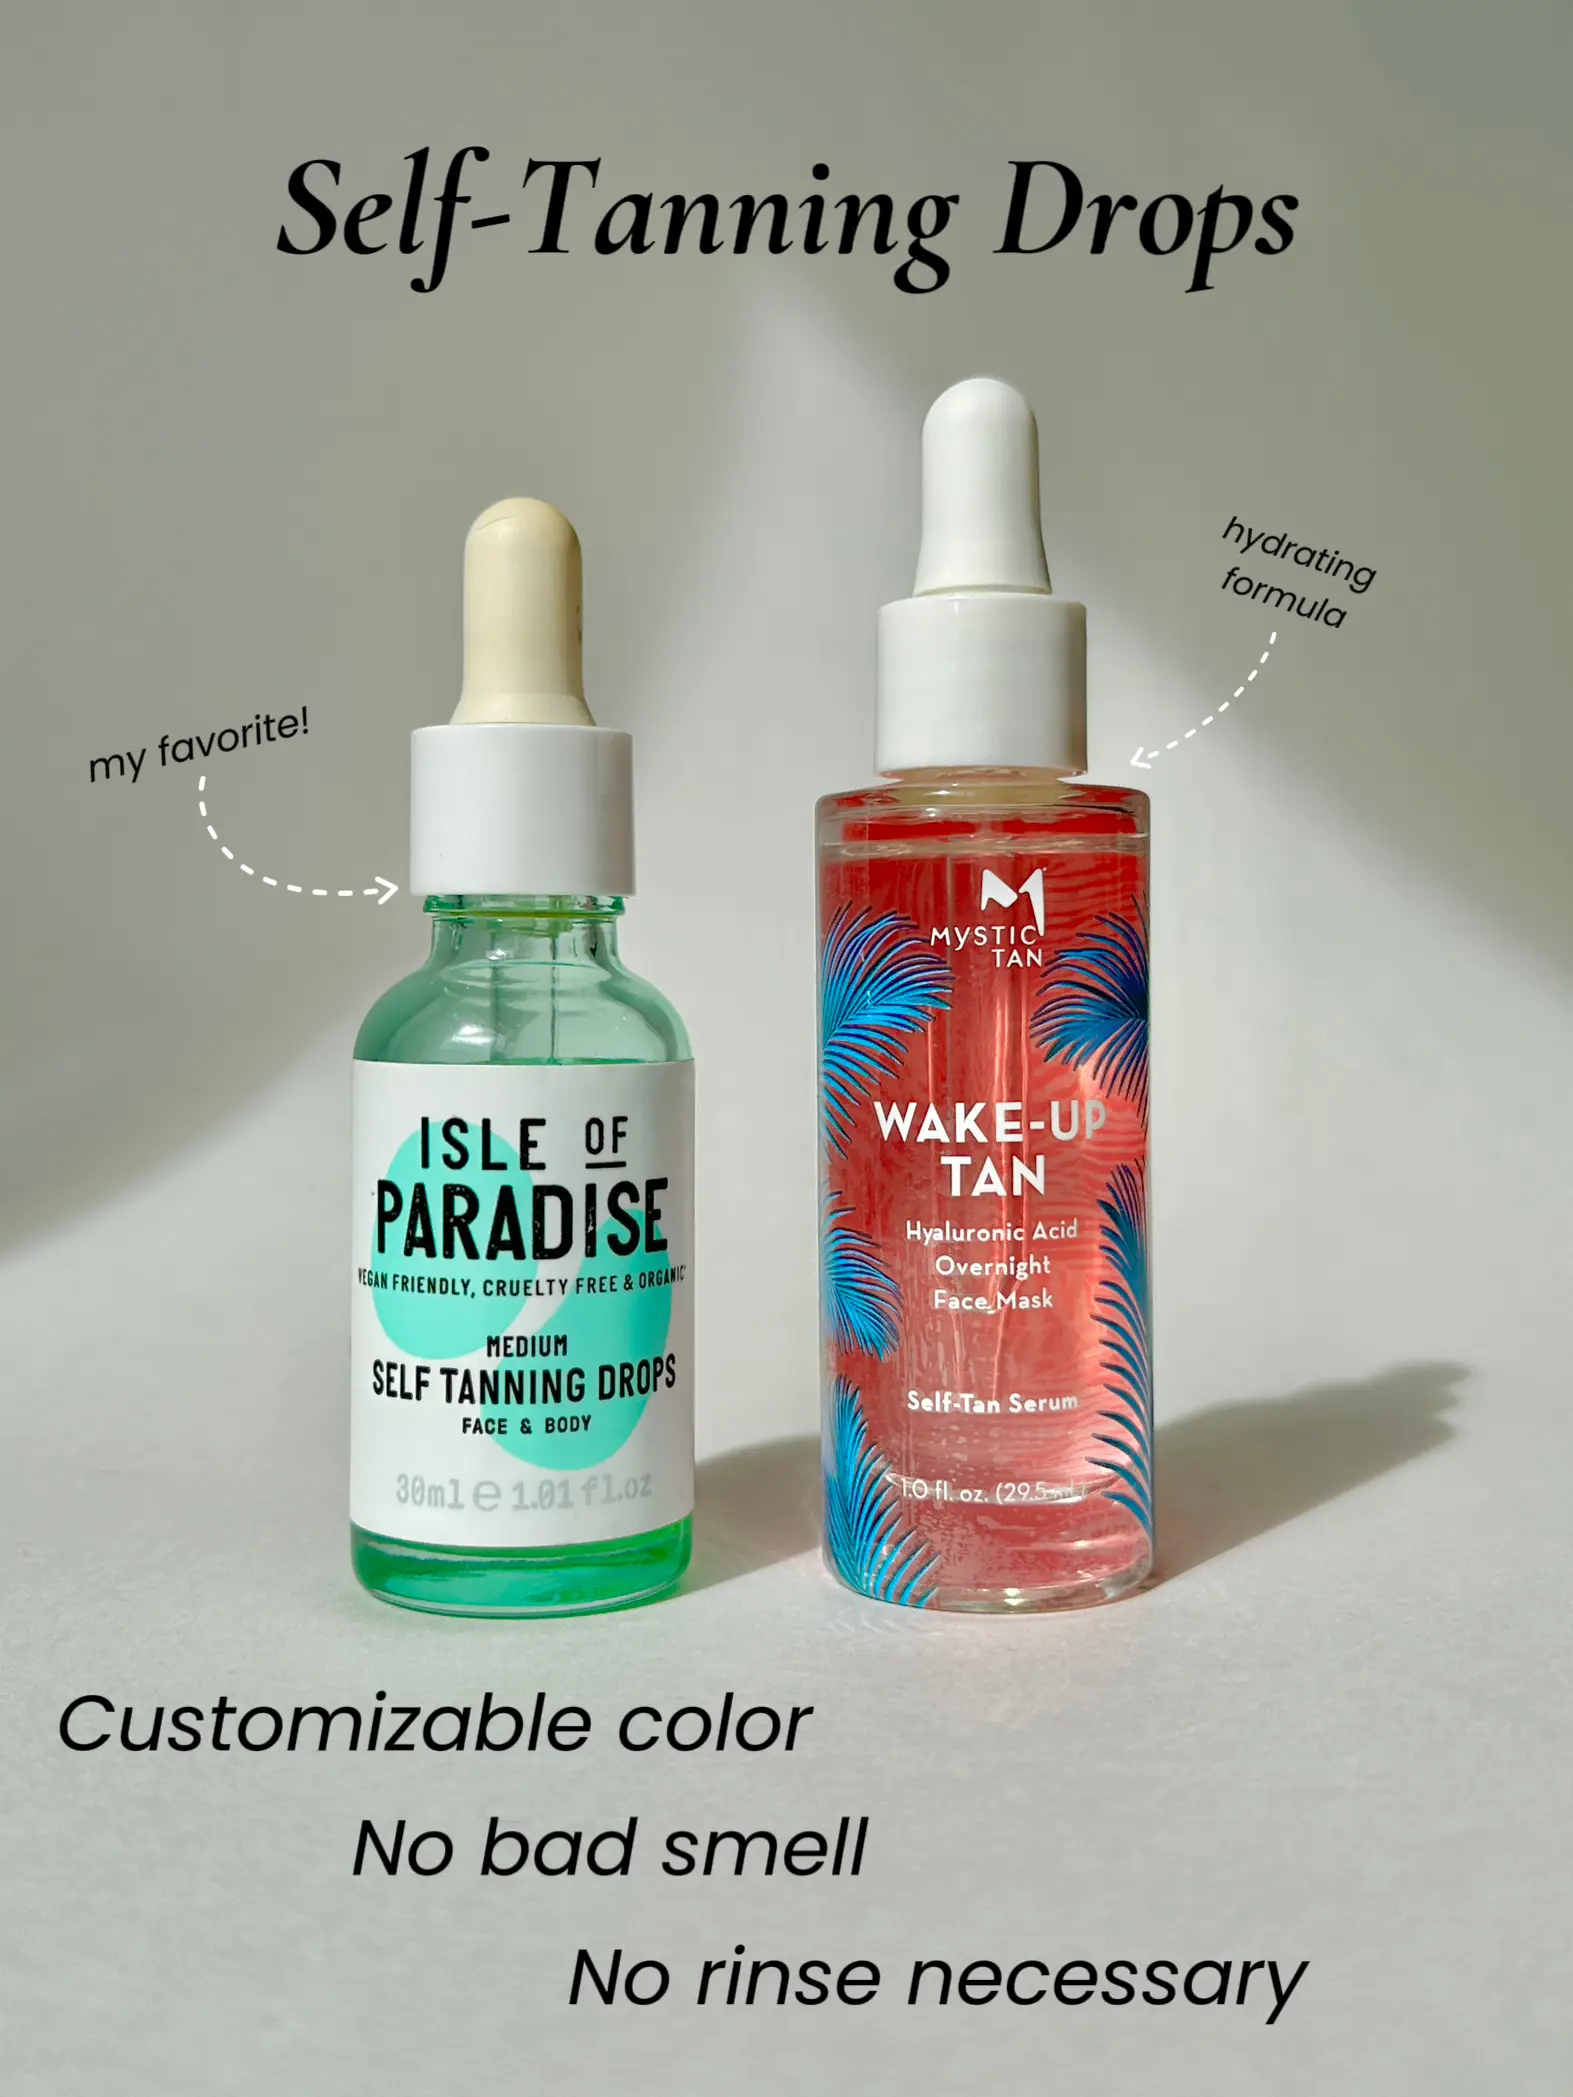 These non-toxic self-tanning serum drops infused with squalane and  hyaluronic acid are 15% off